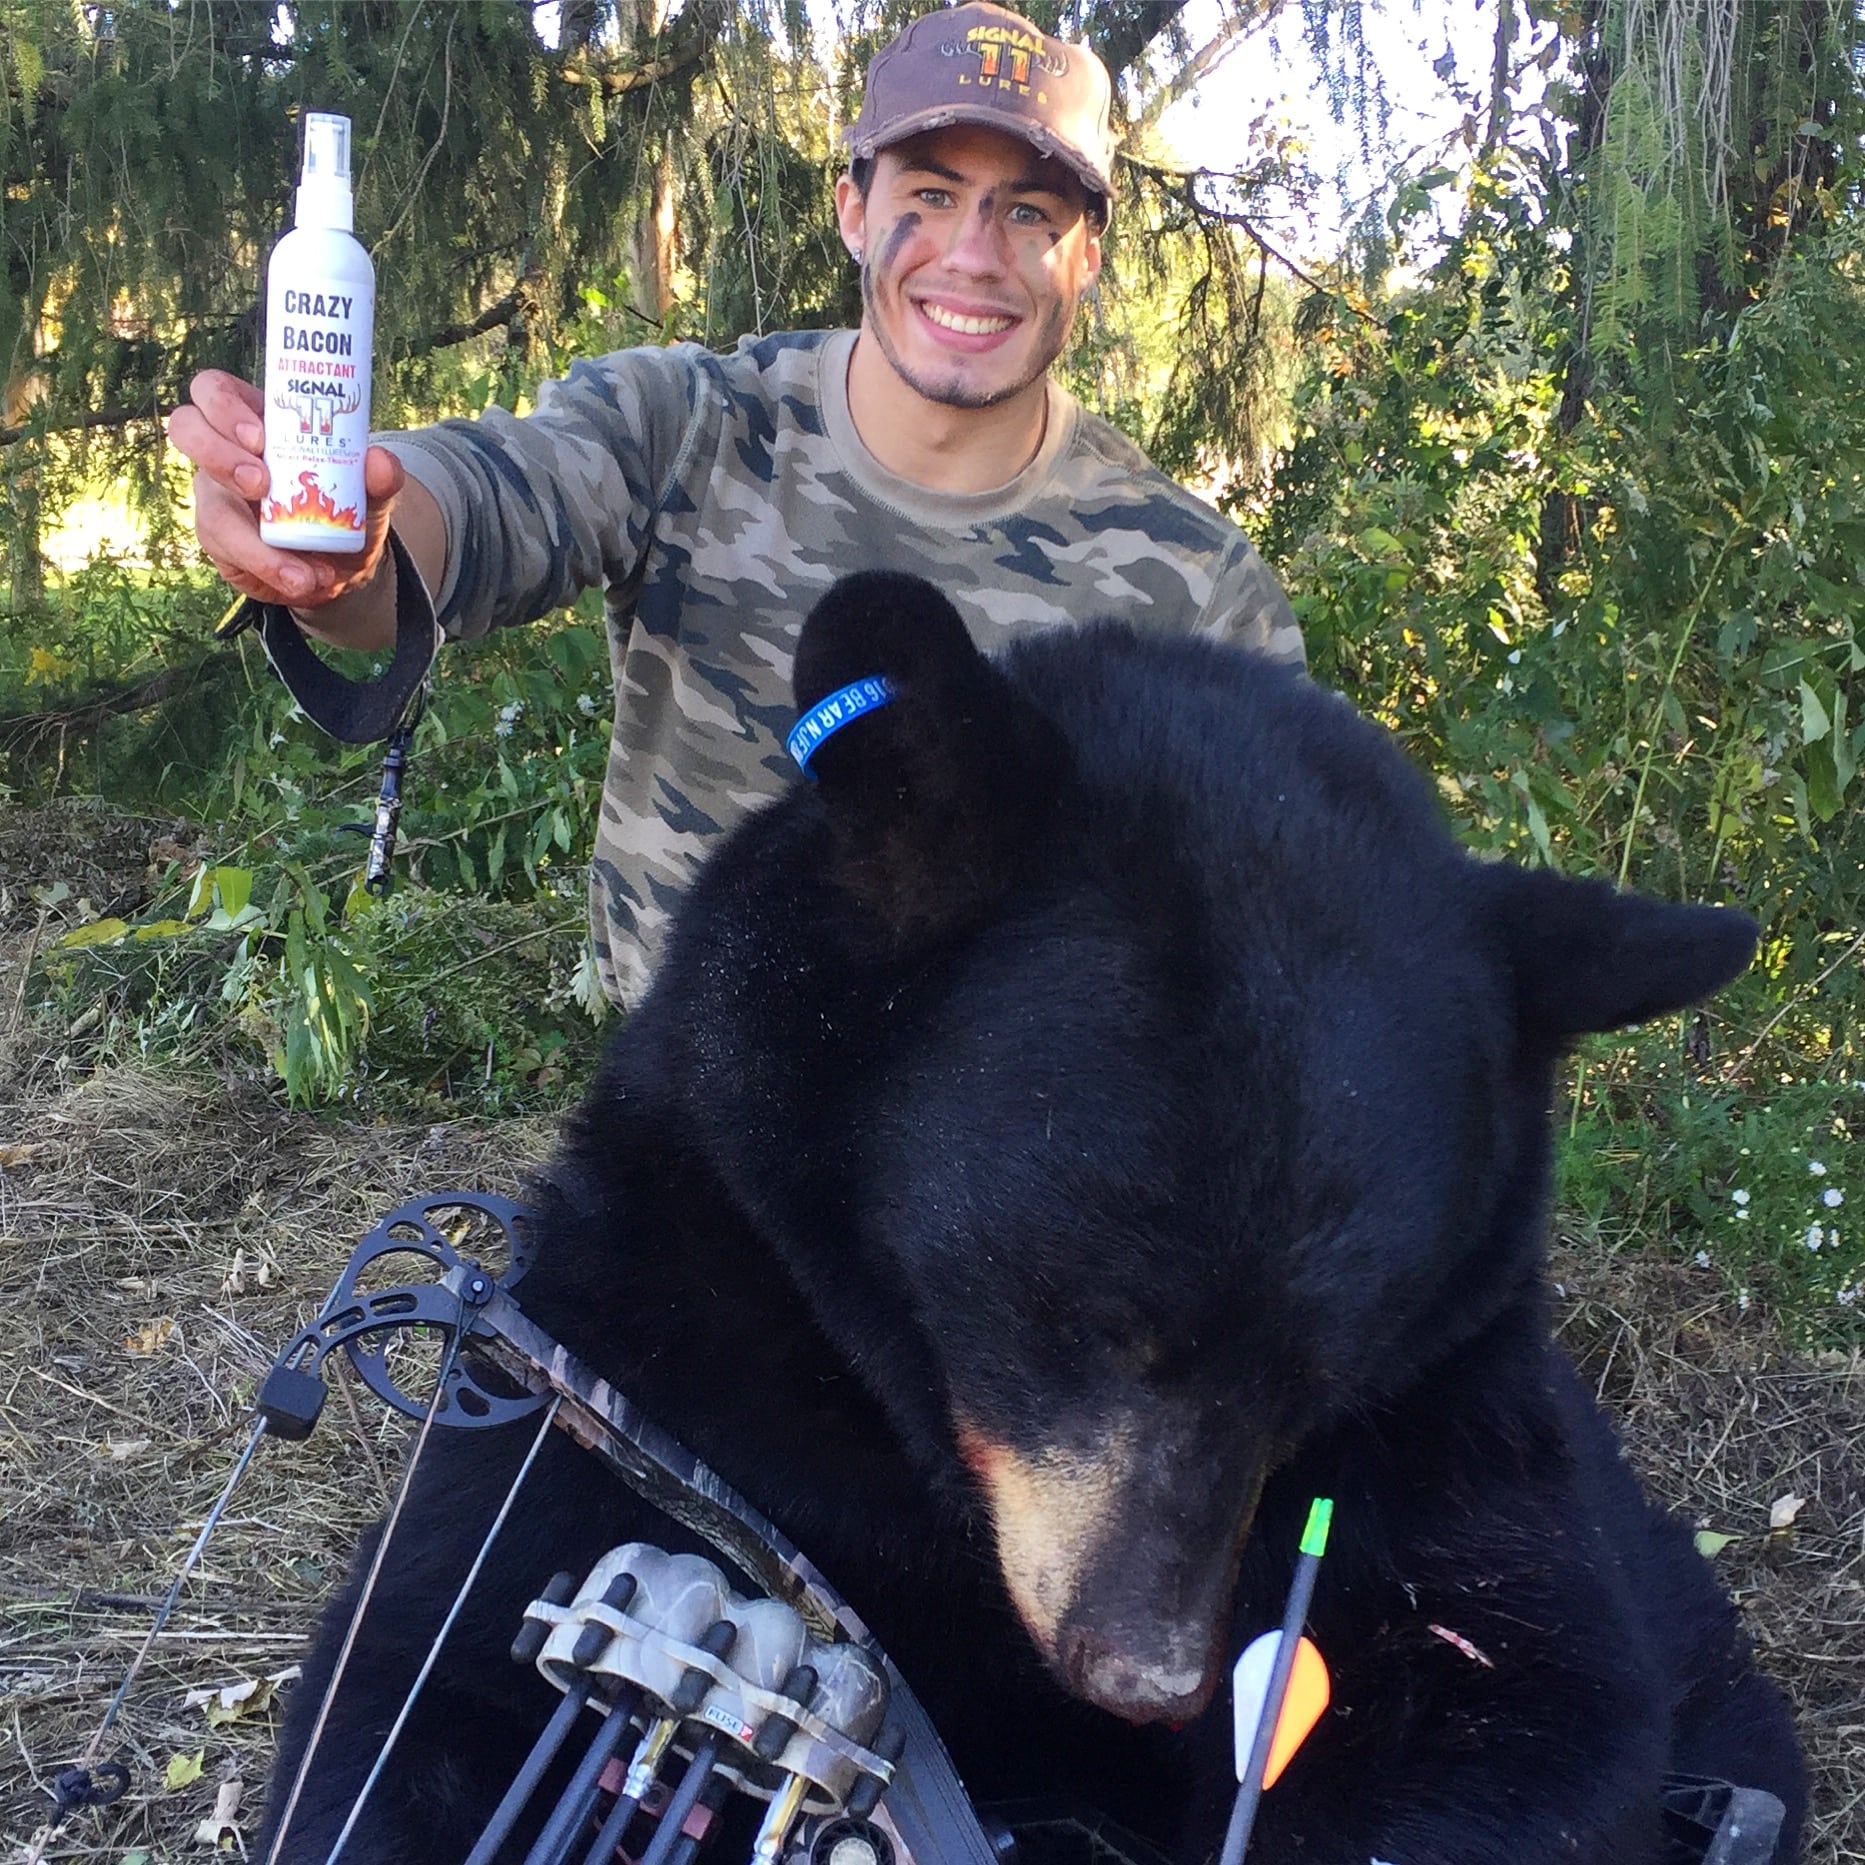 A man holding a bottle of beer next to a bear.